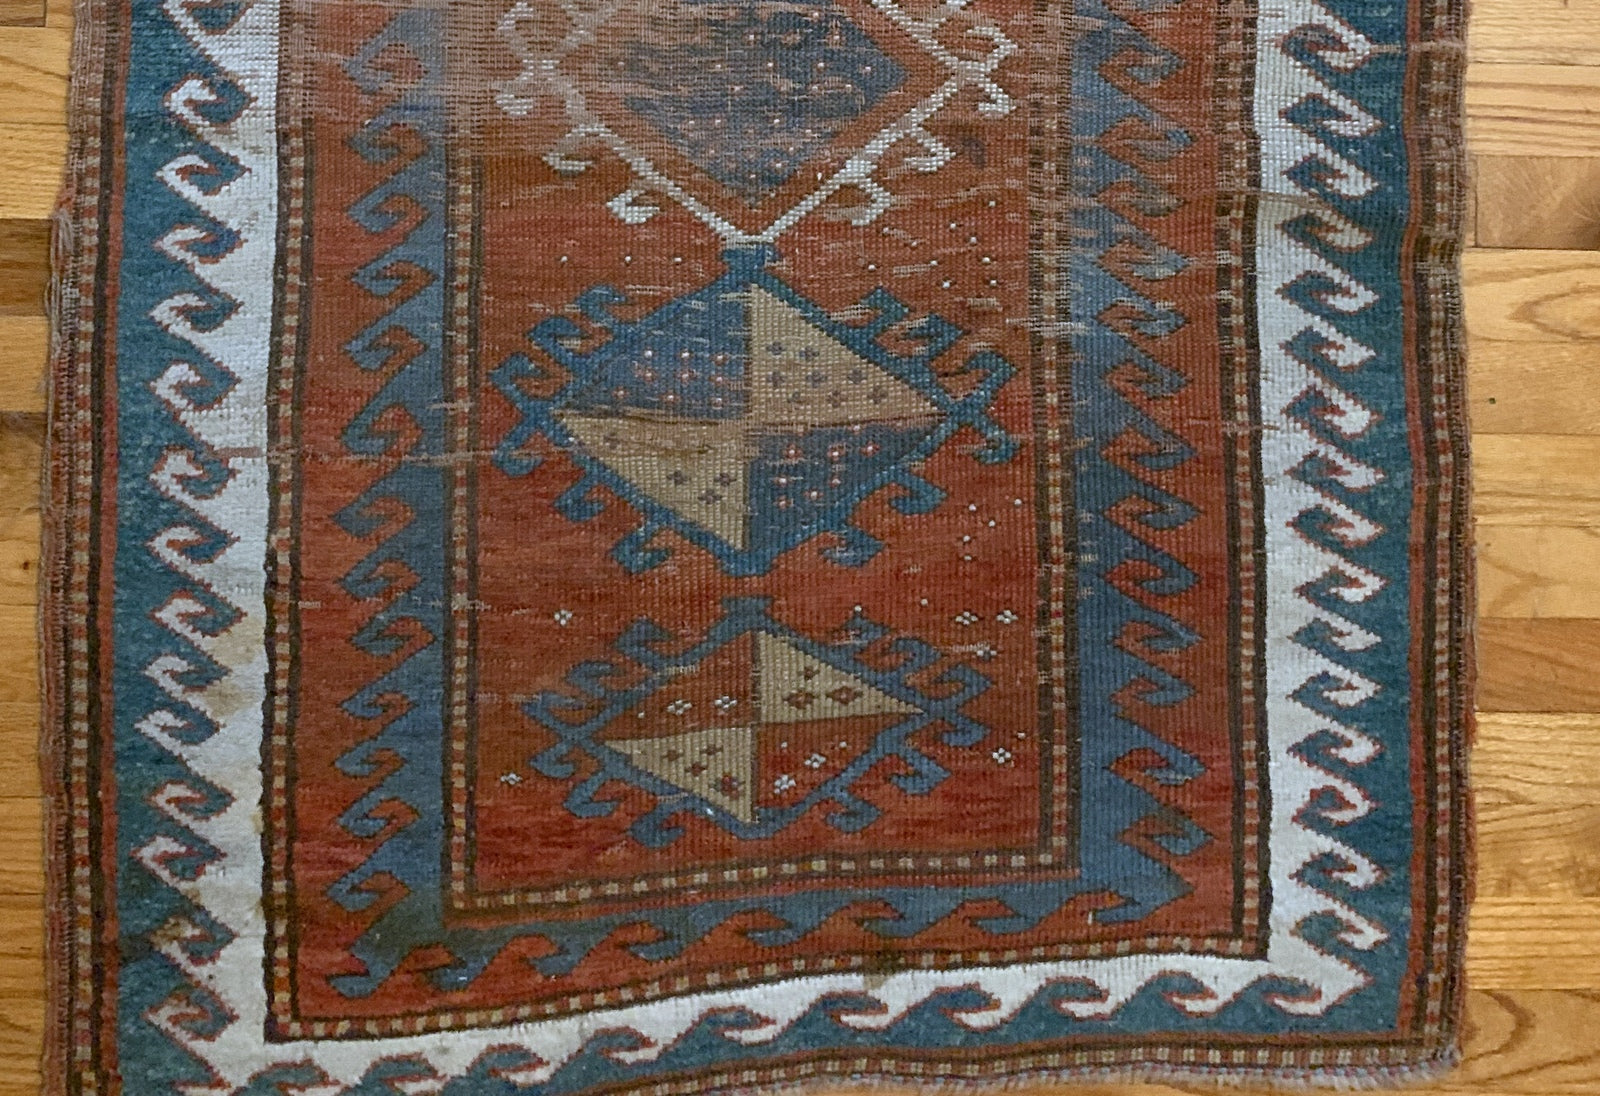 Handmade antique collectible Caucasian Kazak rug in natural dyes. The rug is from the end of 19th century in original condition, it has some age wear